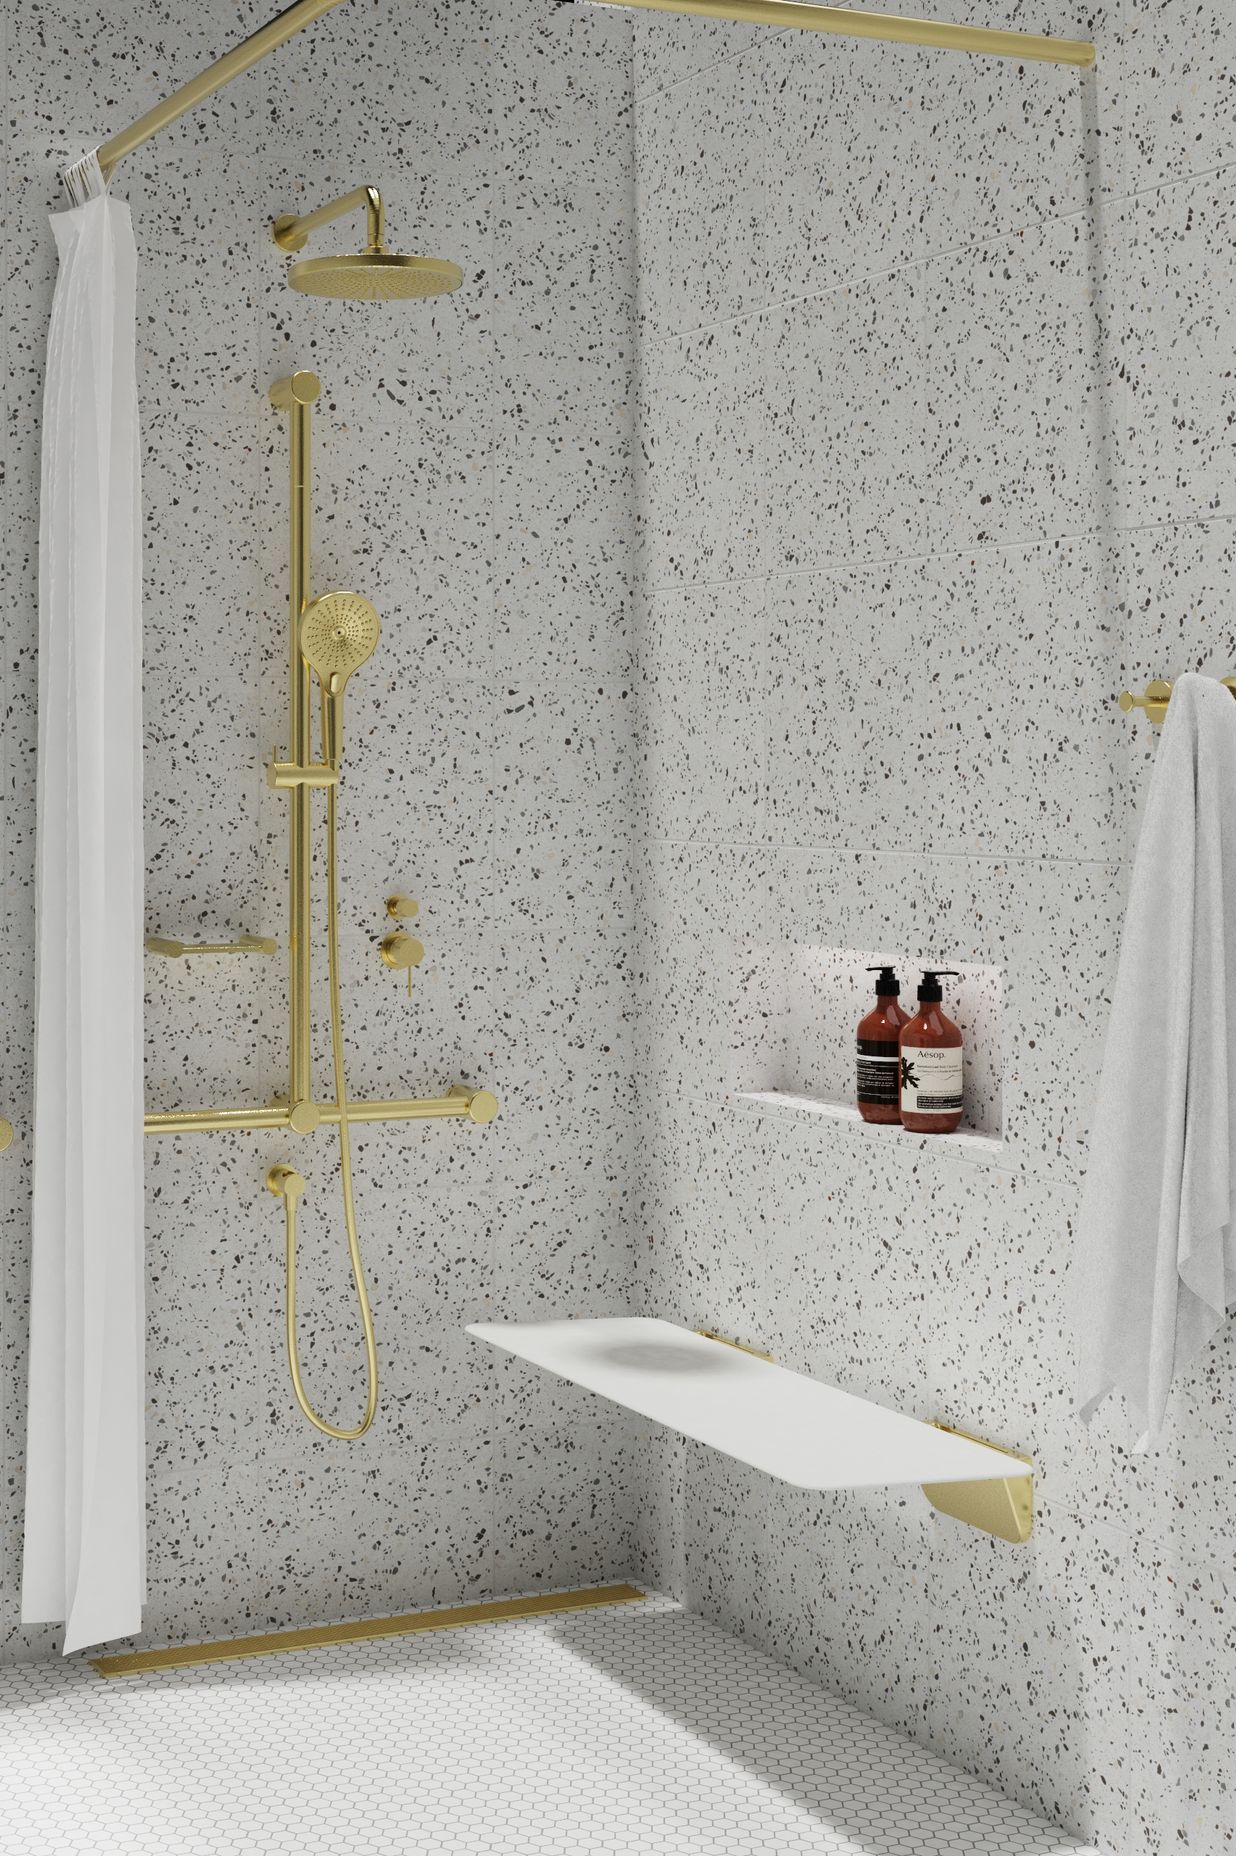 The Liberty Shower Seat ensures comfort and safety while in the shower.